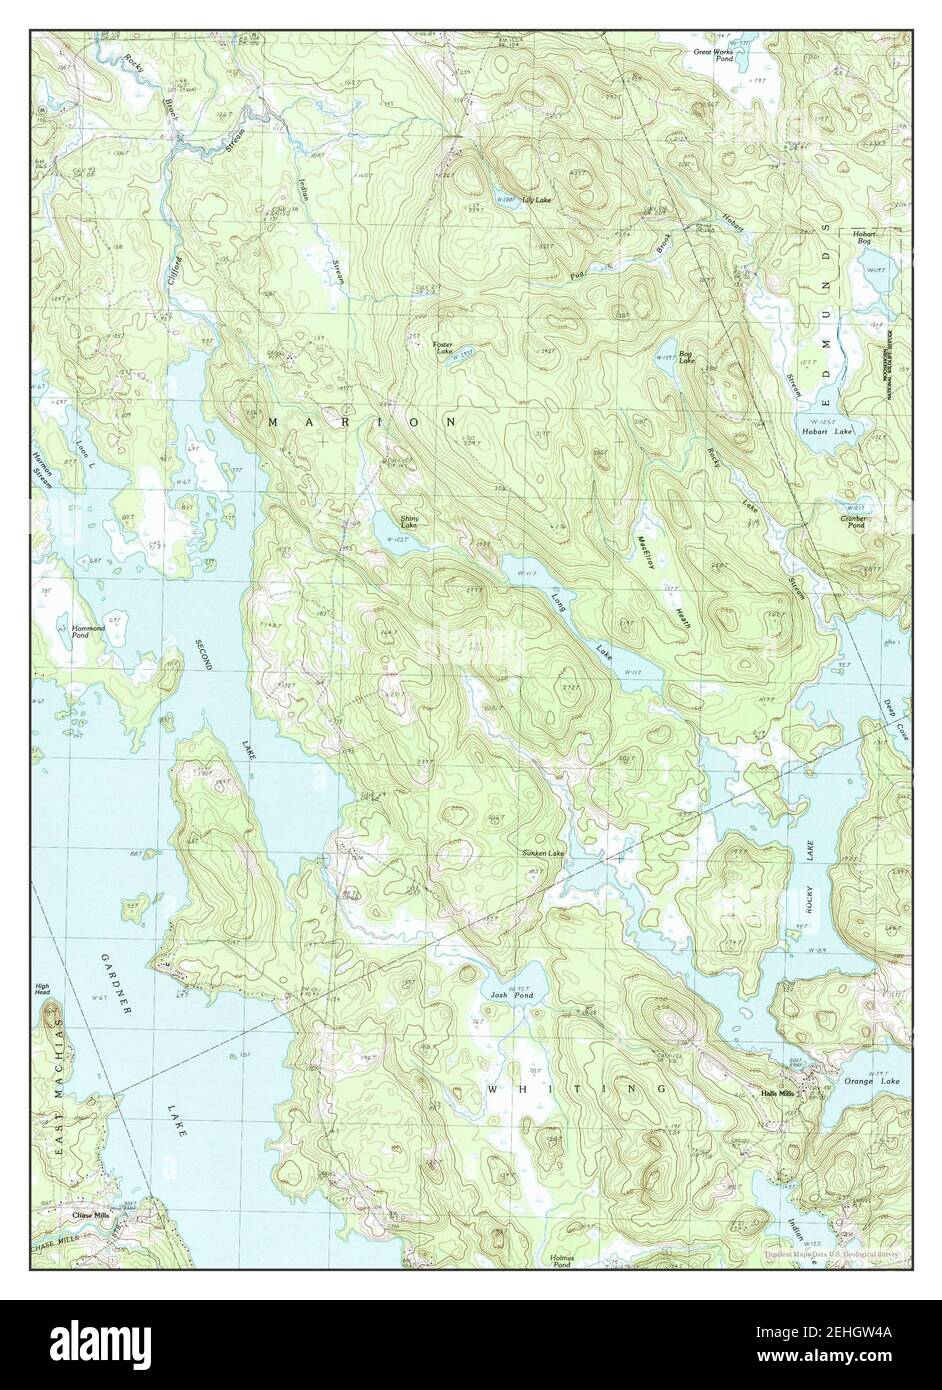 Long Lake, Maine, map 1987, 1:24000, United States of America by Timeless Maps, data U.S. Geological Survey Stock Photo